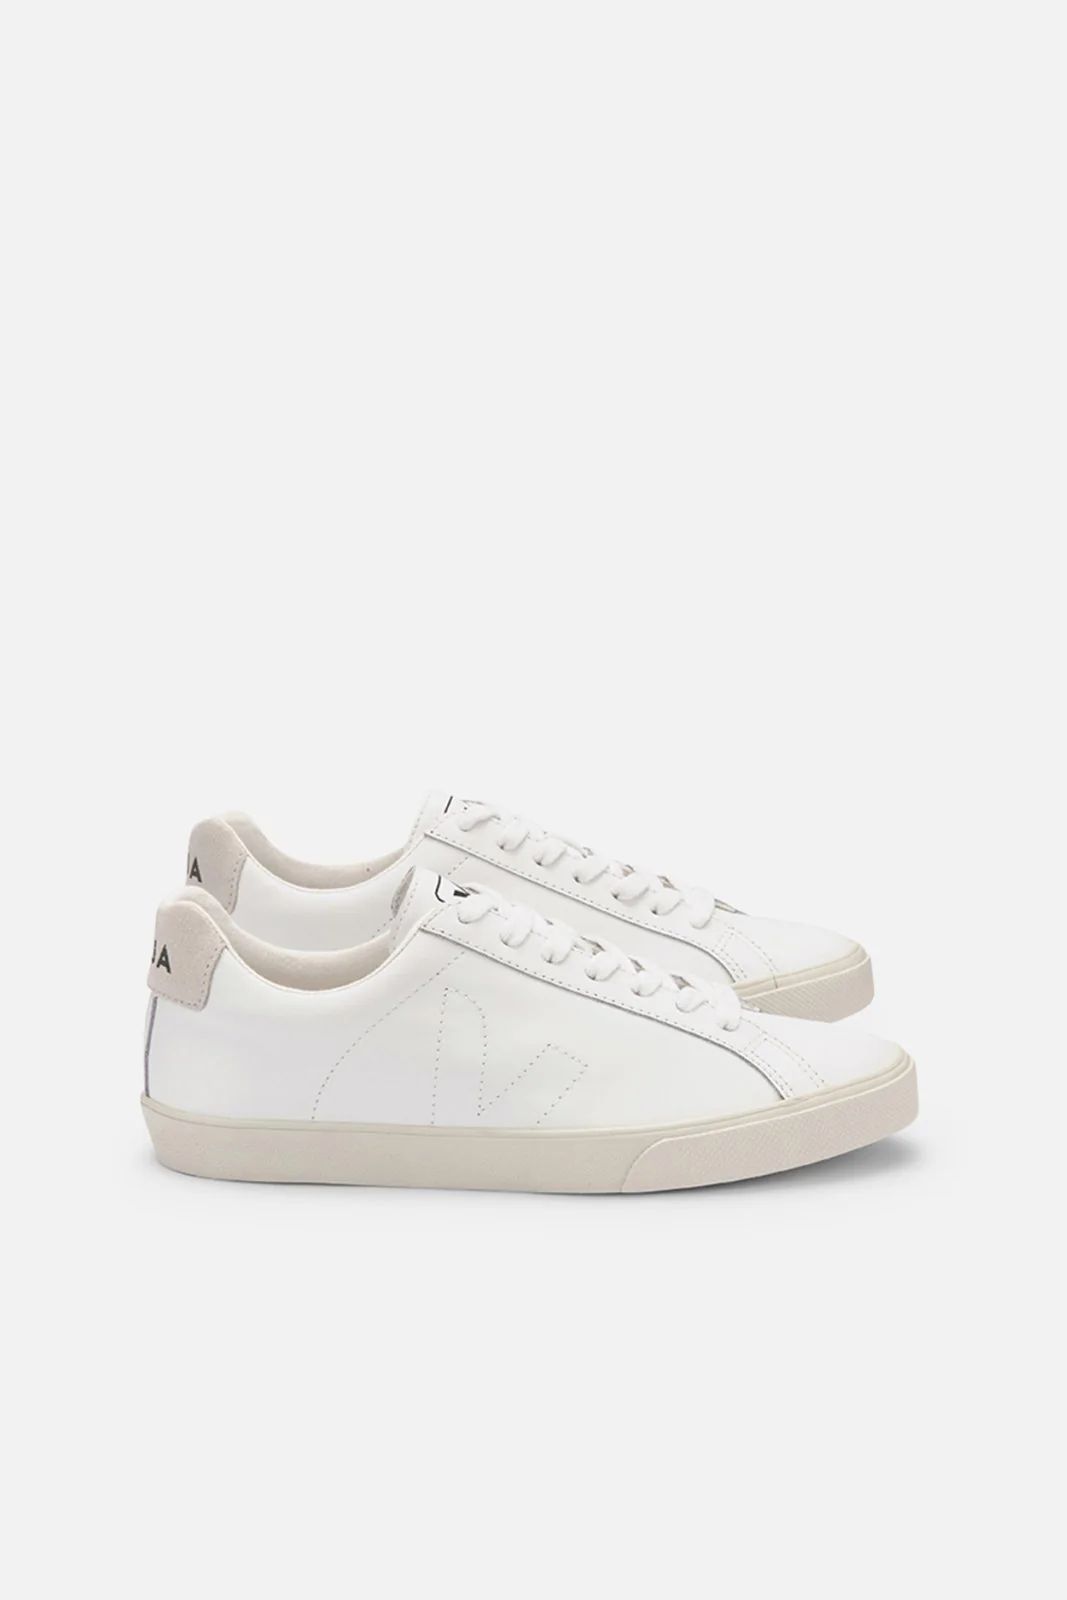 Veja Esplar Leather Low-top Sneakers in Extra White Bandier | Bandier